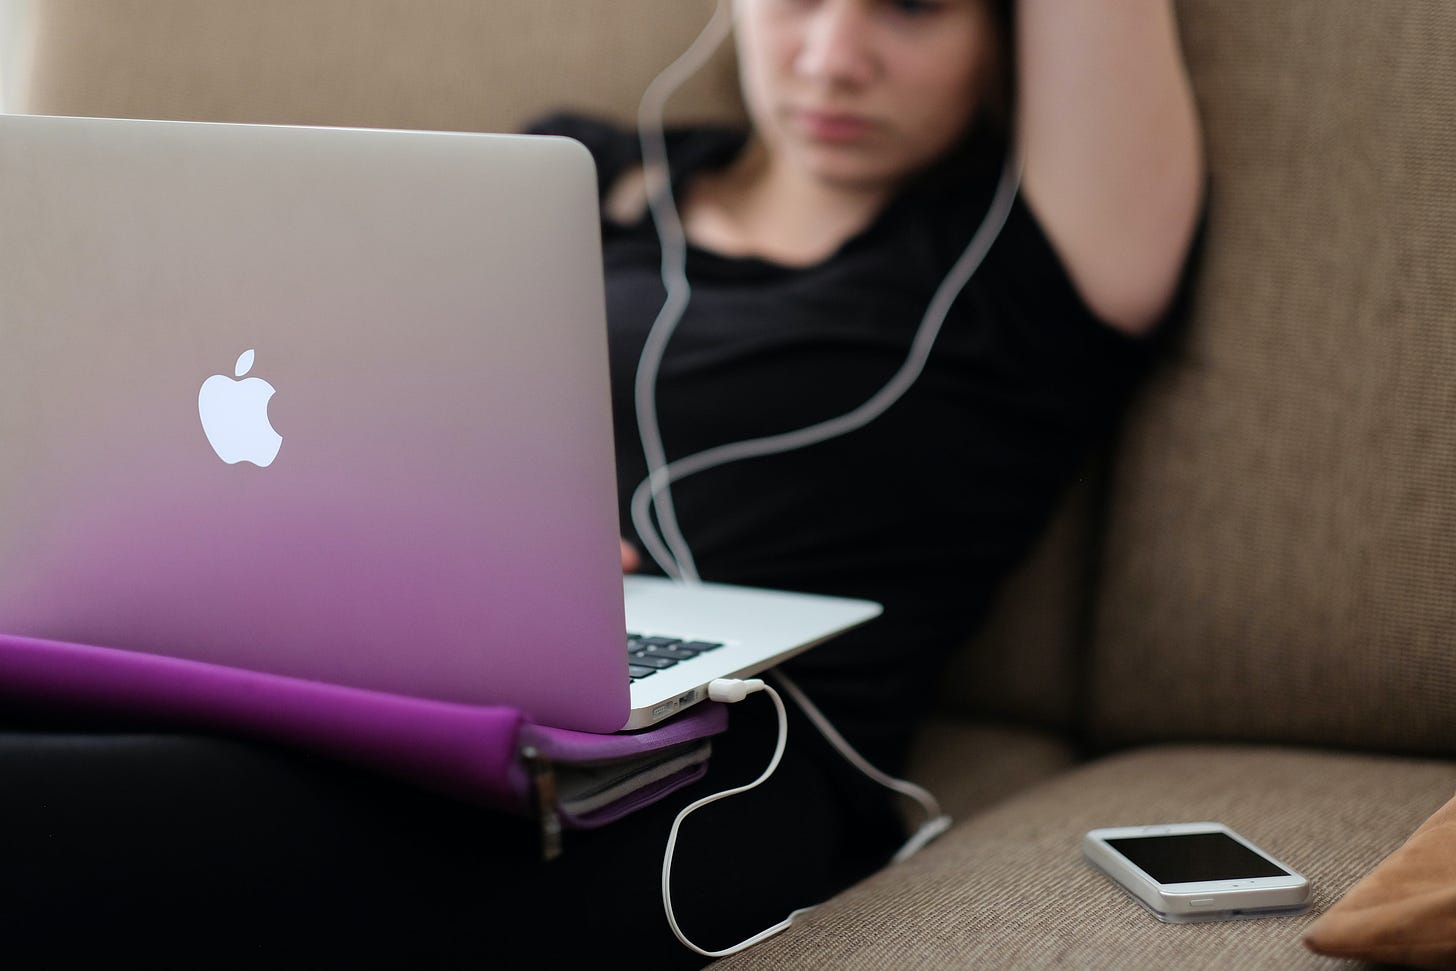 A young woman souches on a couch with a laptop on her lap, headphones in, her phone next to her.